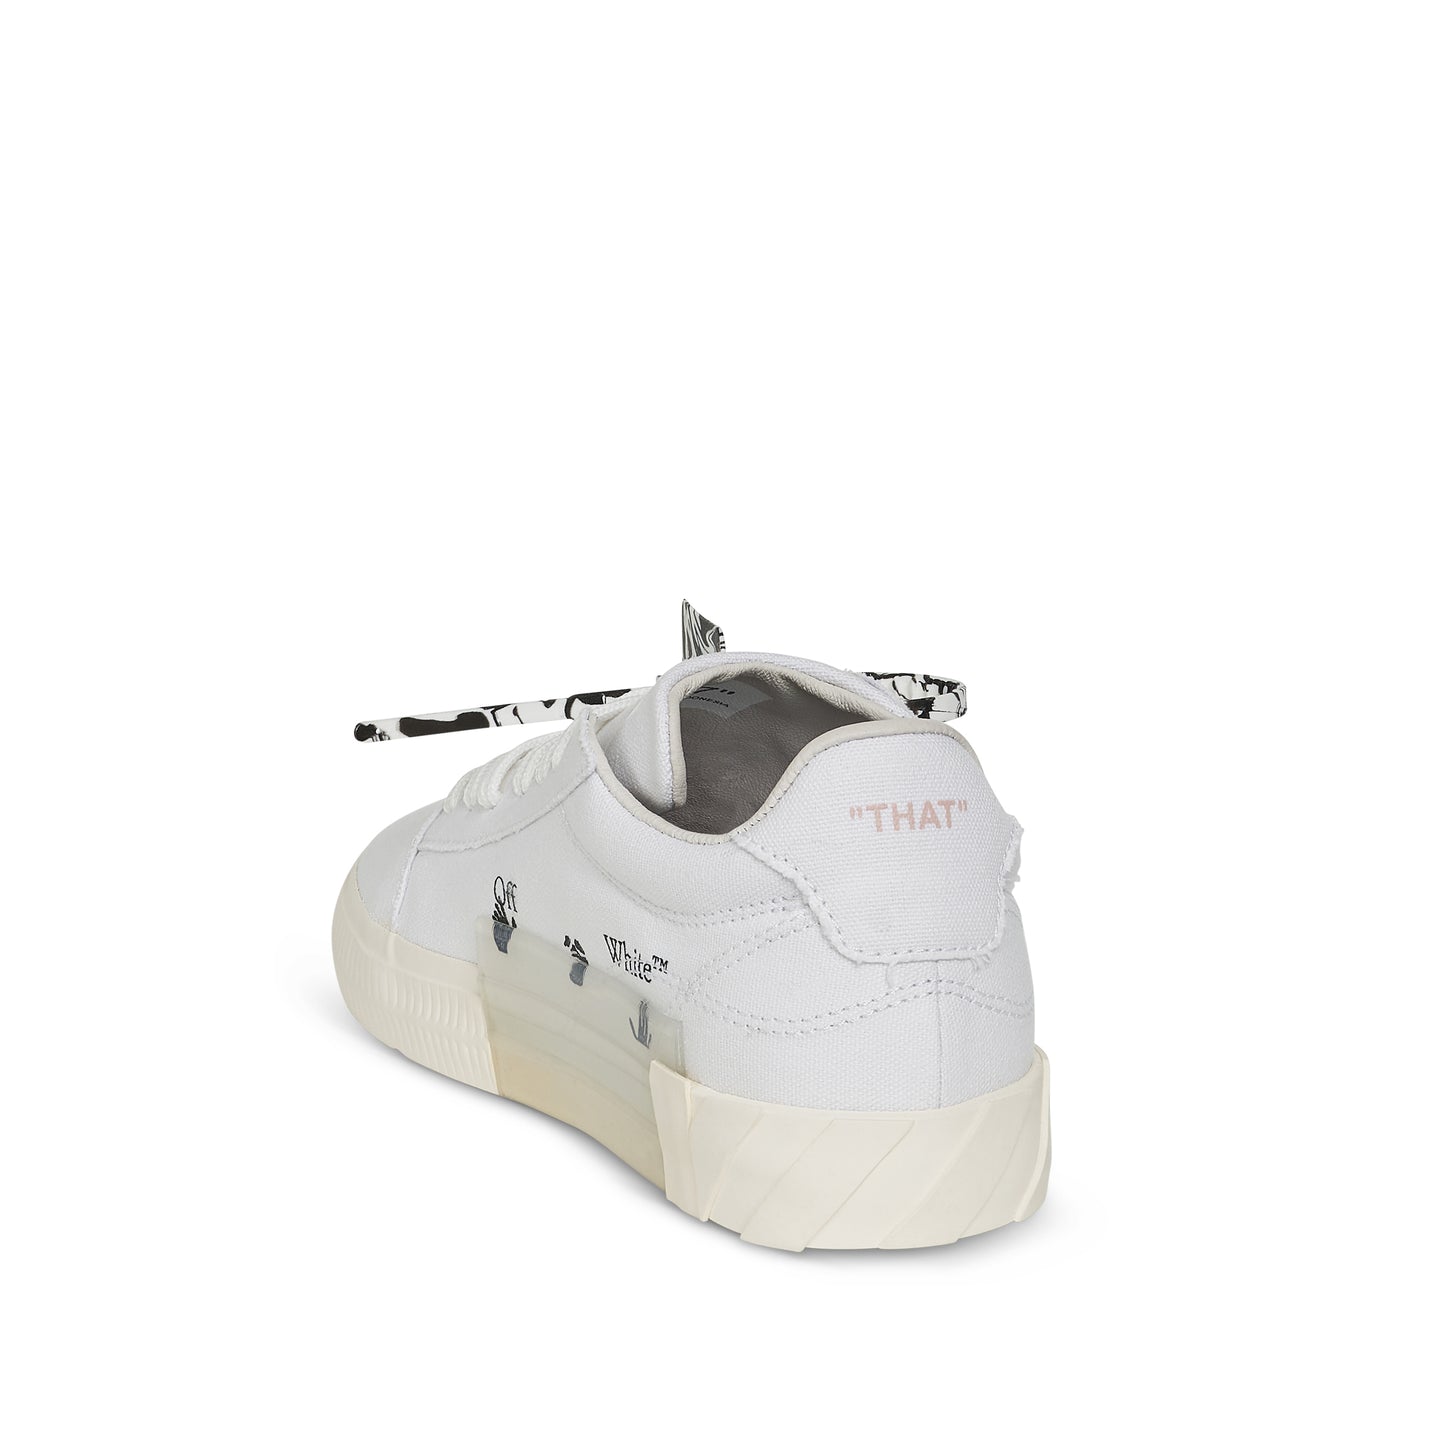 Low Vulcanized Eco Canvas Sneaker in White/Pink